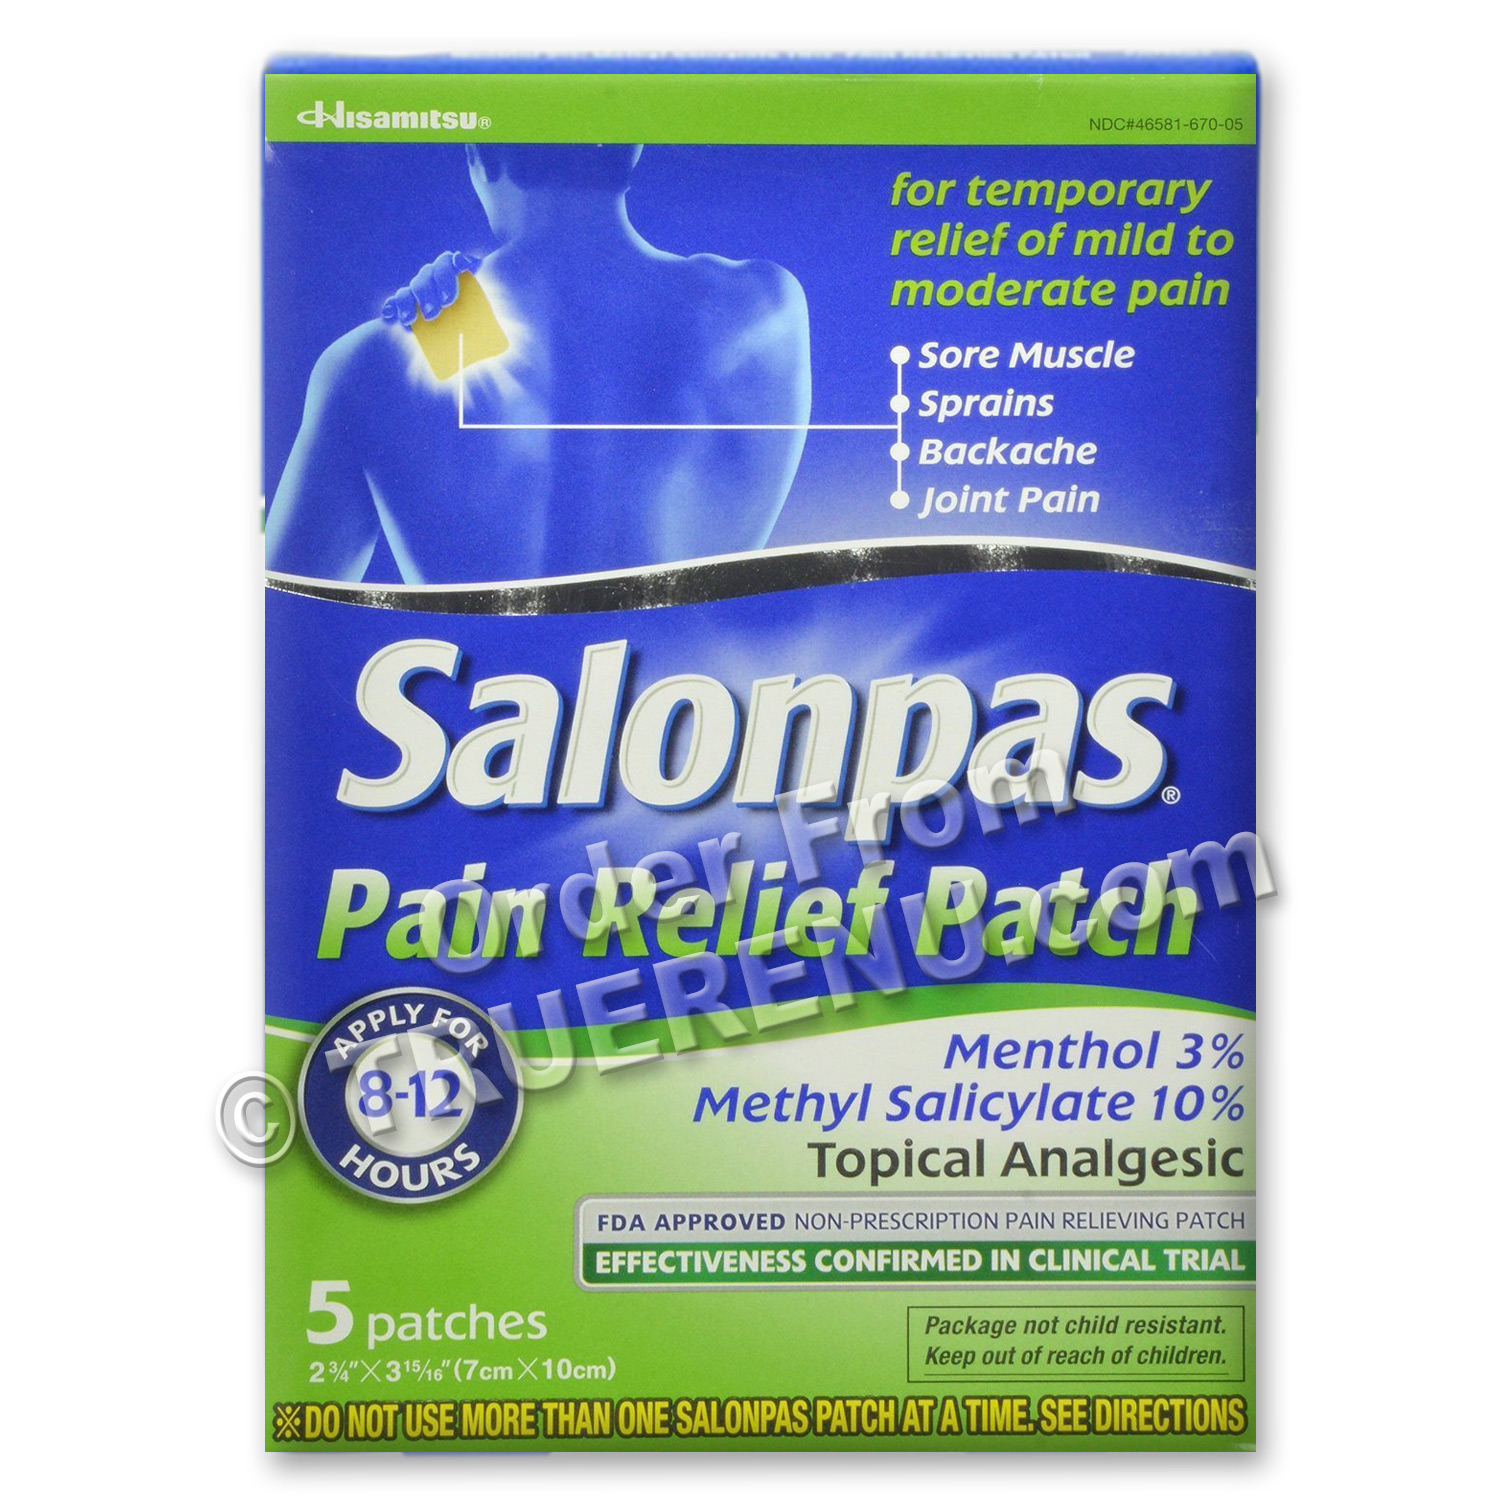 PHOTO TO COME: SALONPAS Ultrathin Pain Relief Patches - 5 Patches